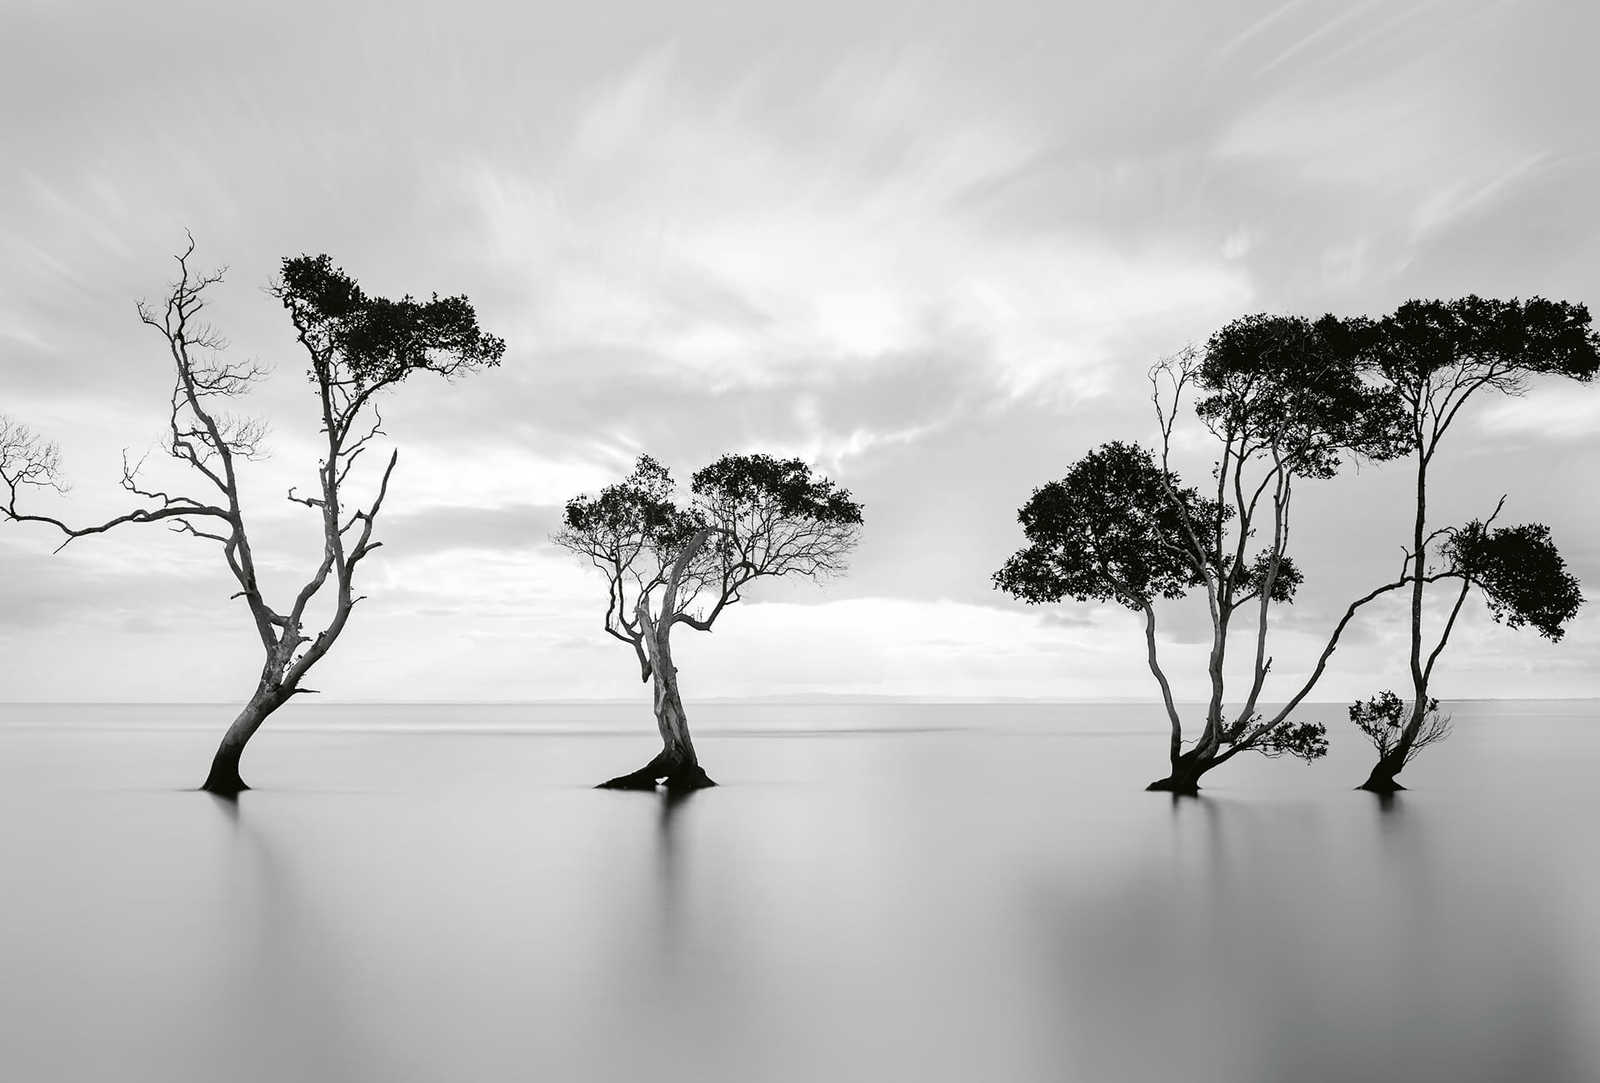         Photo wallpaper Trees in water - white, black, grey
    